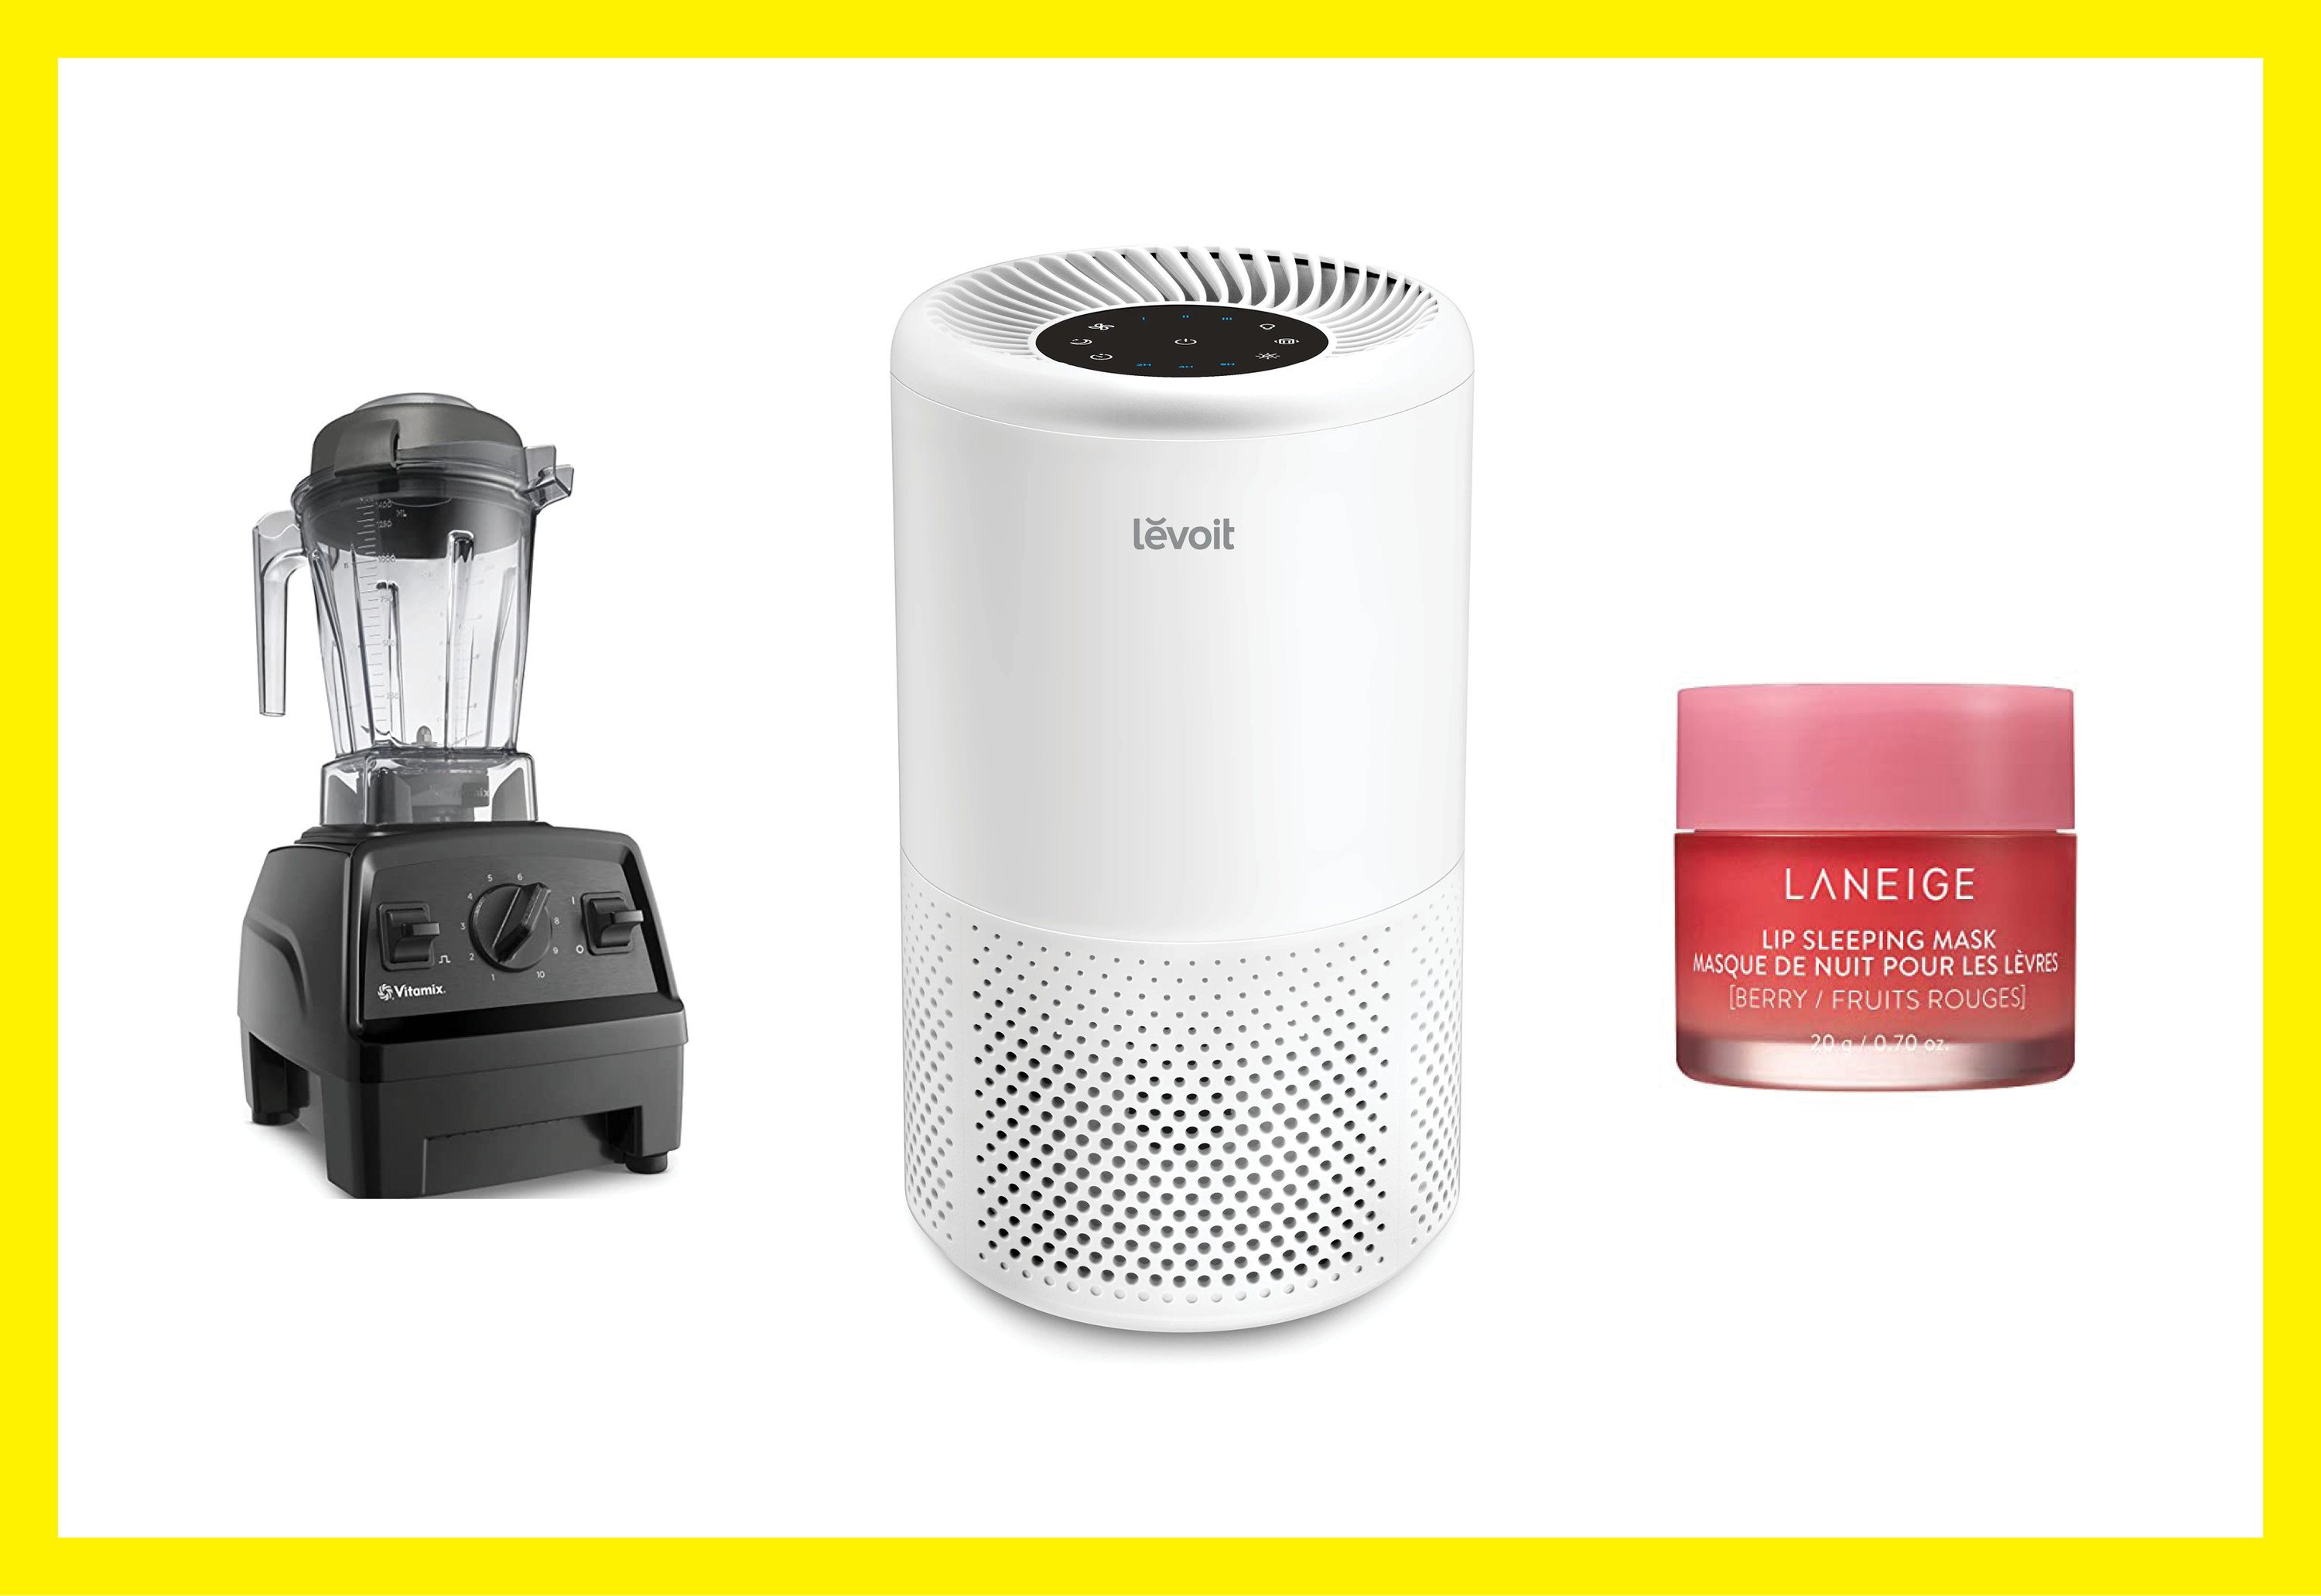 A white Levoit air purifier in the center of a yellow frame. A Vitamix blender is smaller to the left side and a red Laneige lip sleeping mask container is to the right.